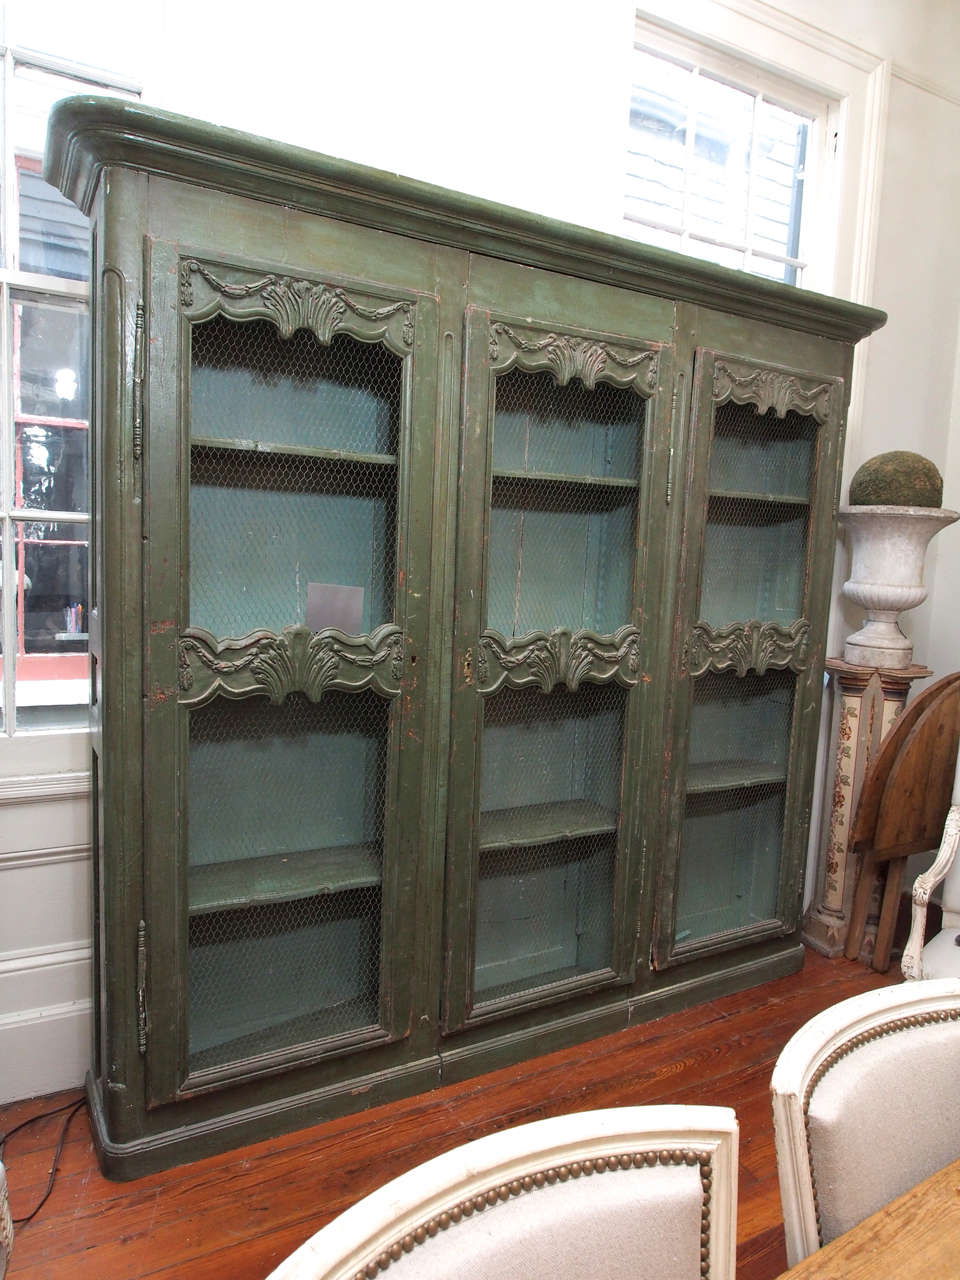 Early 19th century painted bookcase in green (original paint) with three chicken wire doors and three shelves inside.